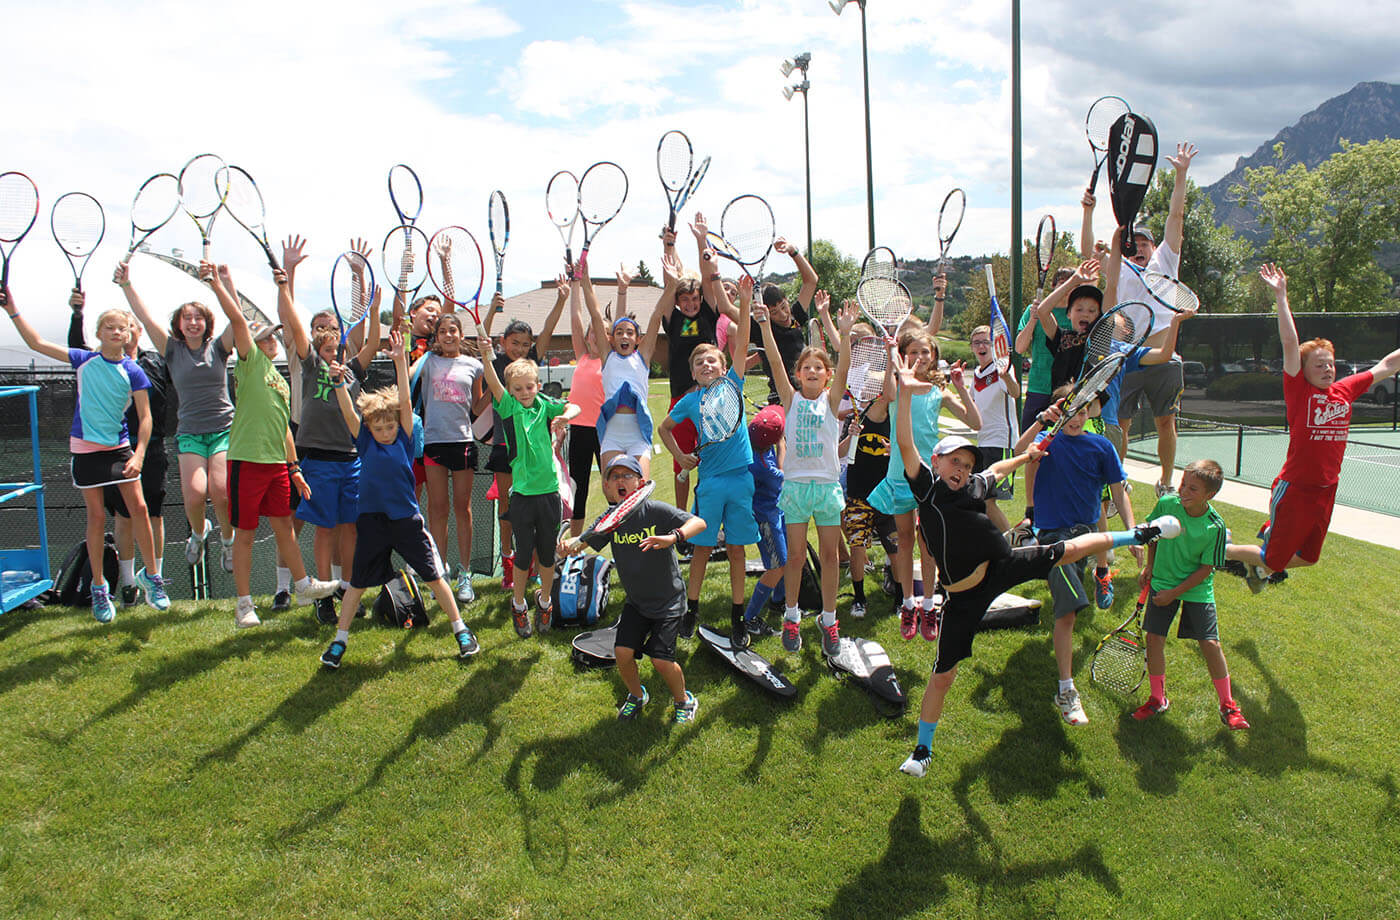 kids posing with raised tennis racquets